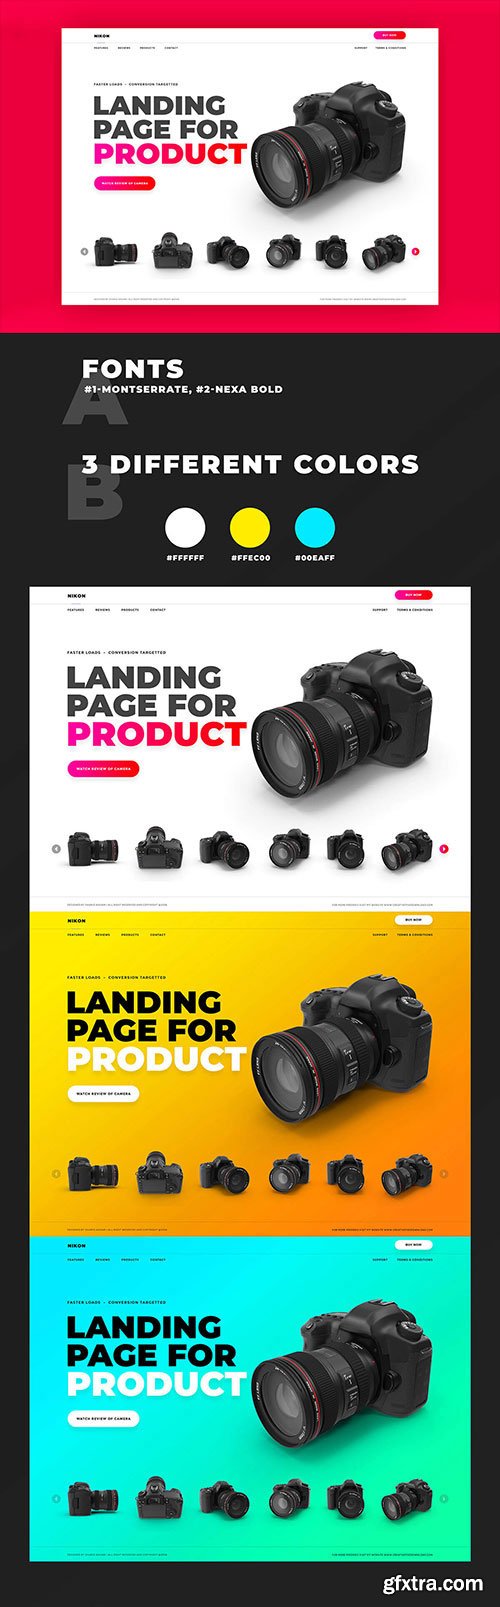 Product Landing Page Website PSD